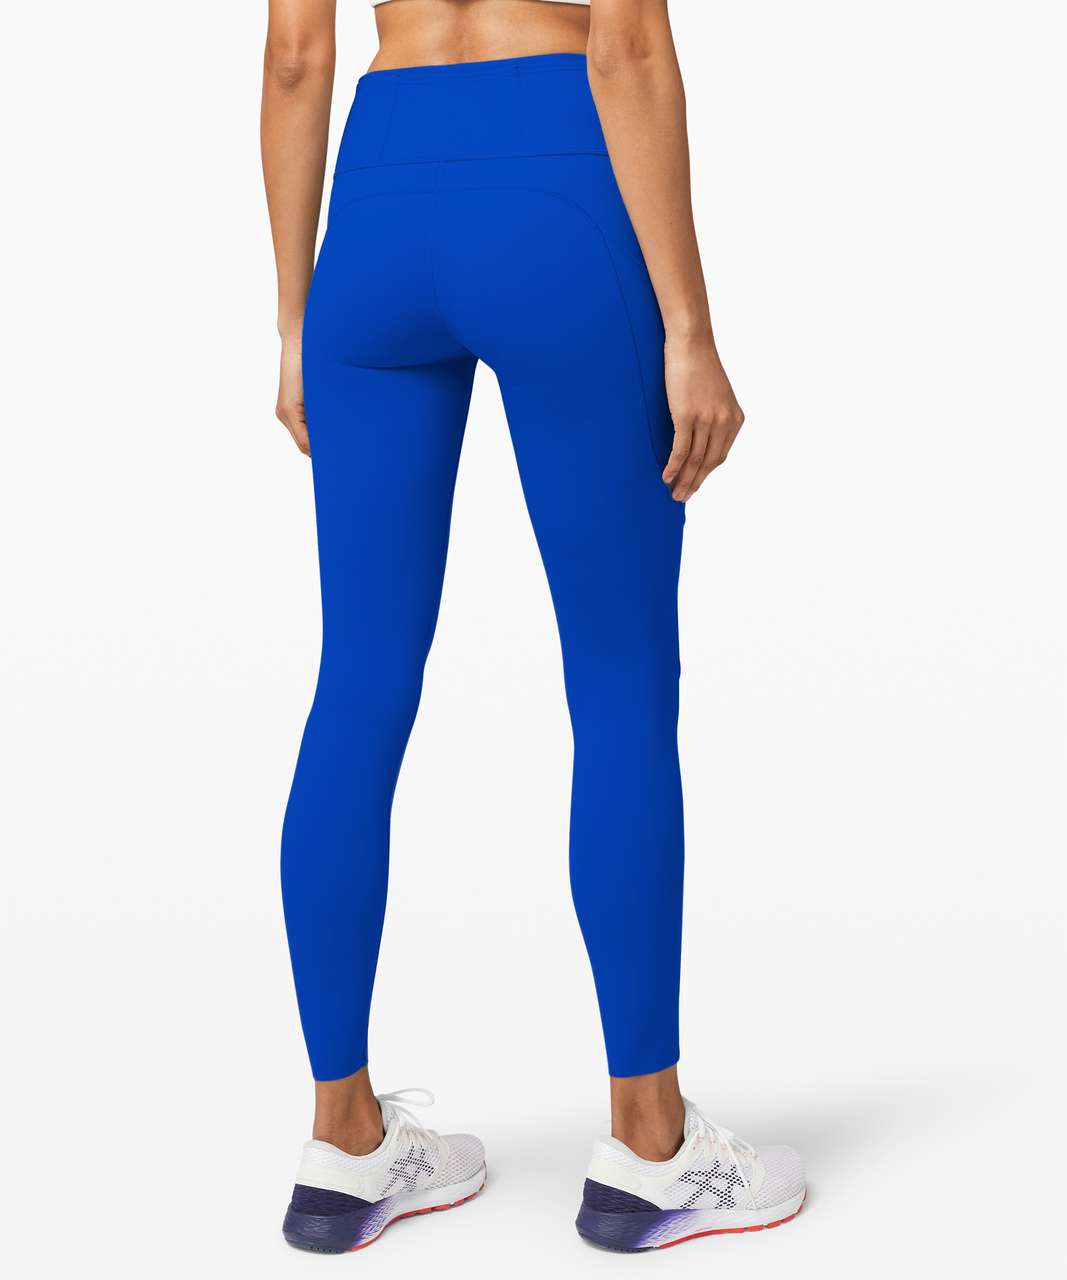 Lululemon Fast and Free Tight 28" *Non-Reflective - Cerulean Blue